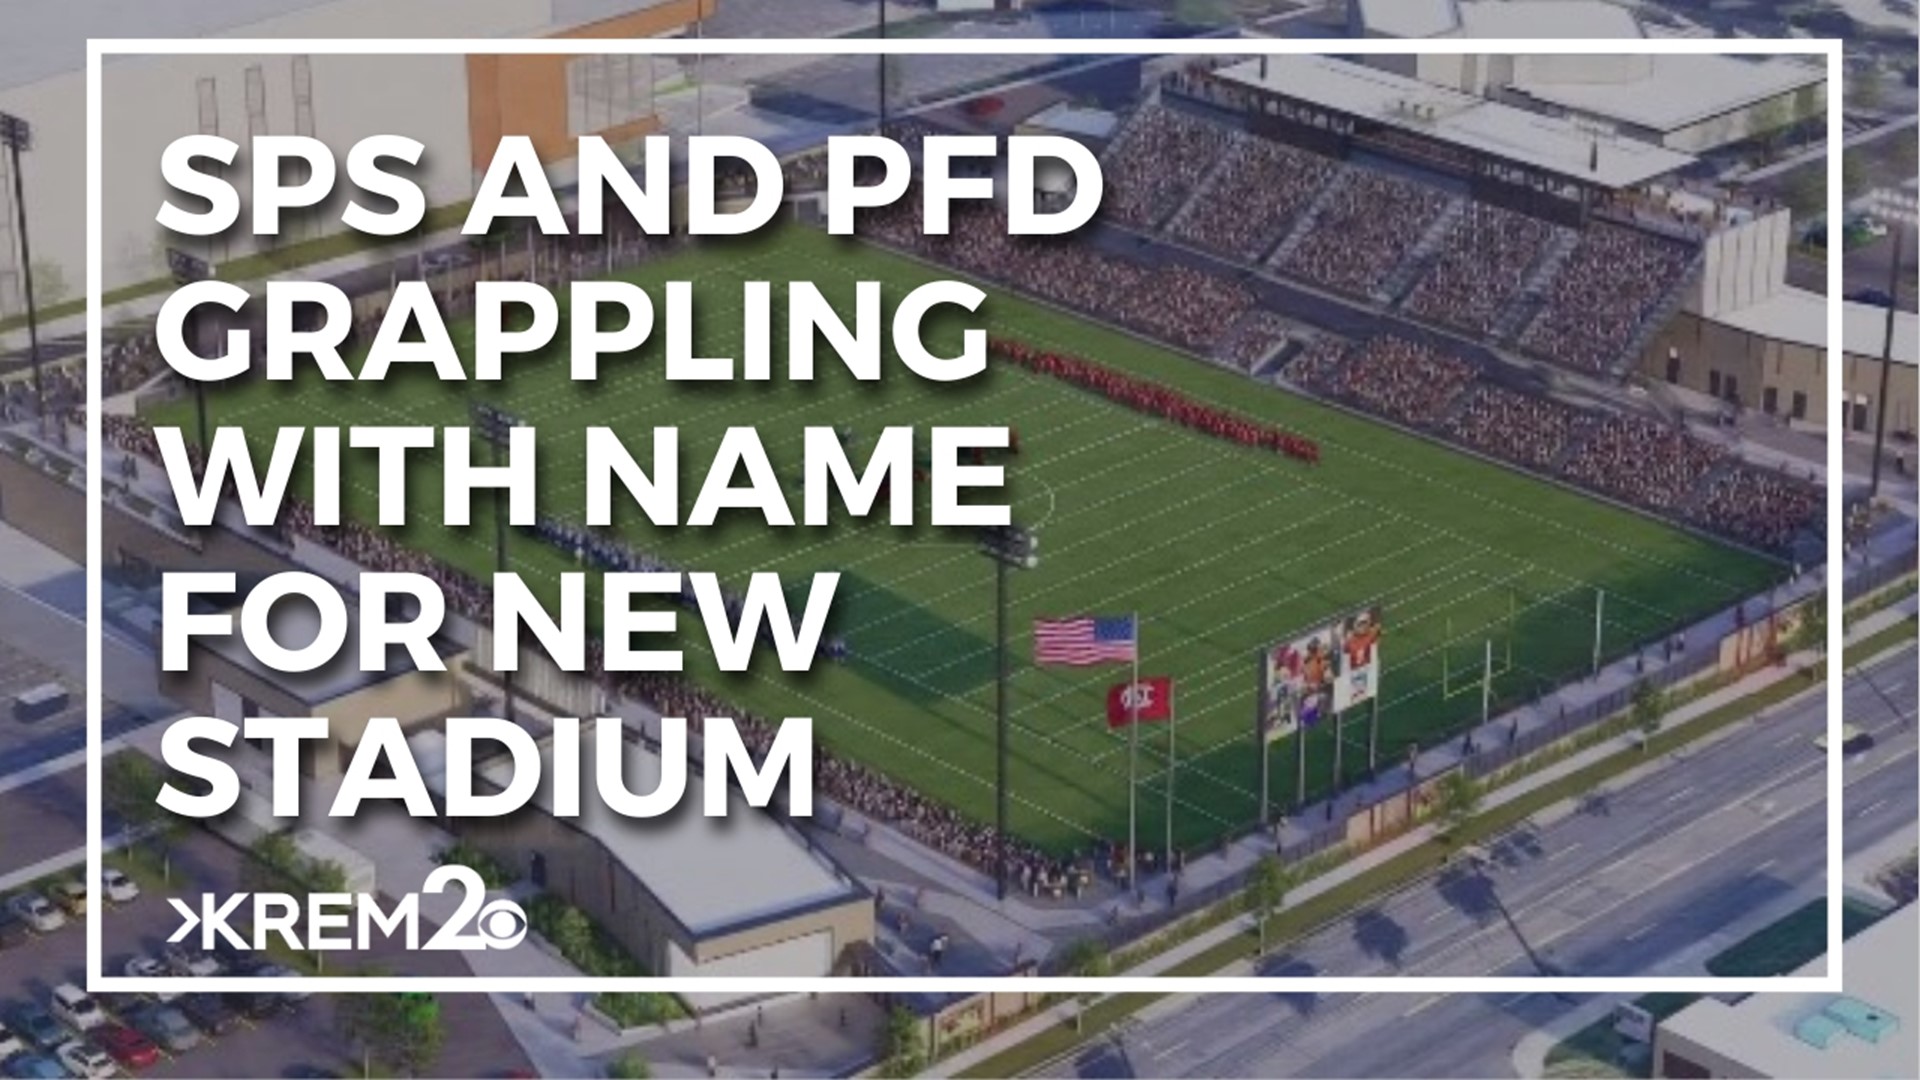 Both Spokane Public Schools and the Public Facilities District need to agree on a stadium name and sponsor.